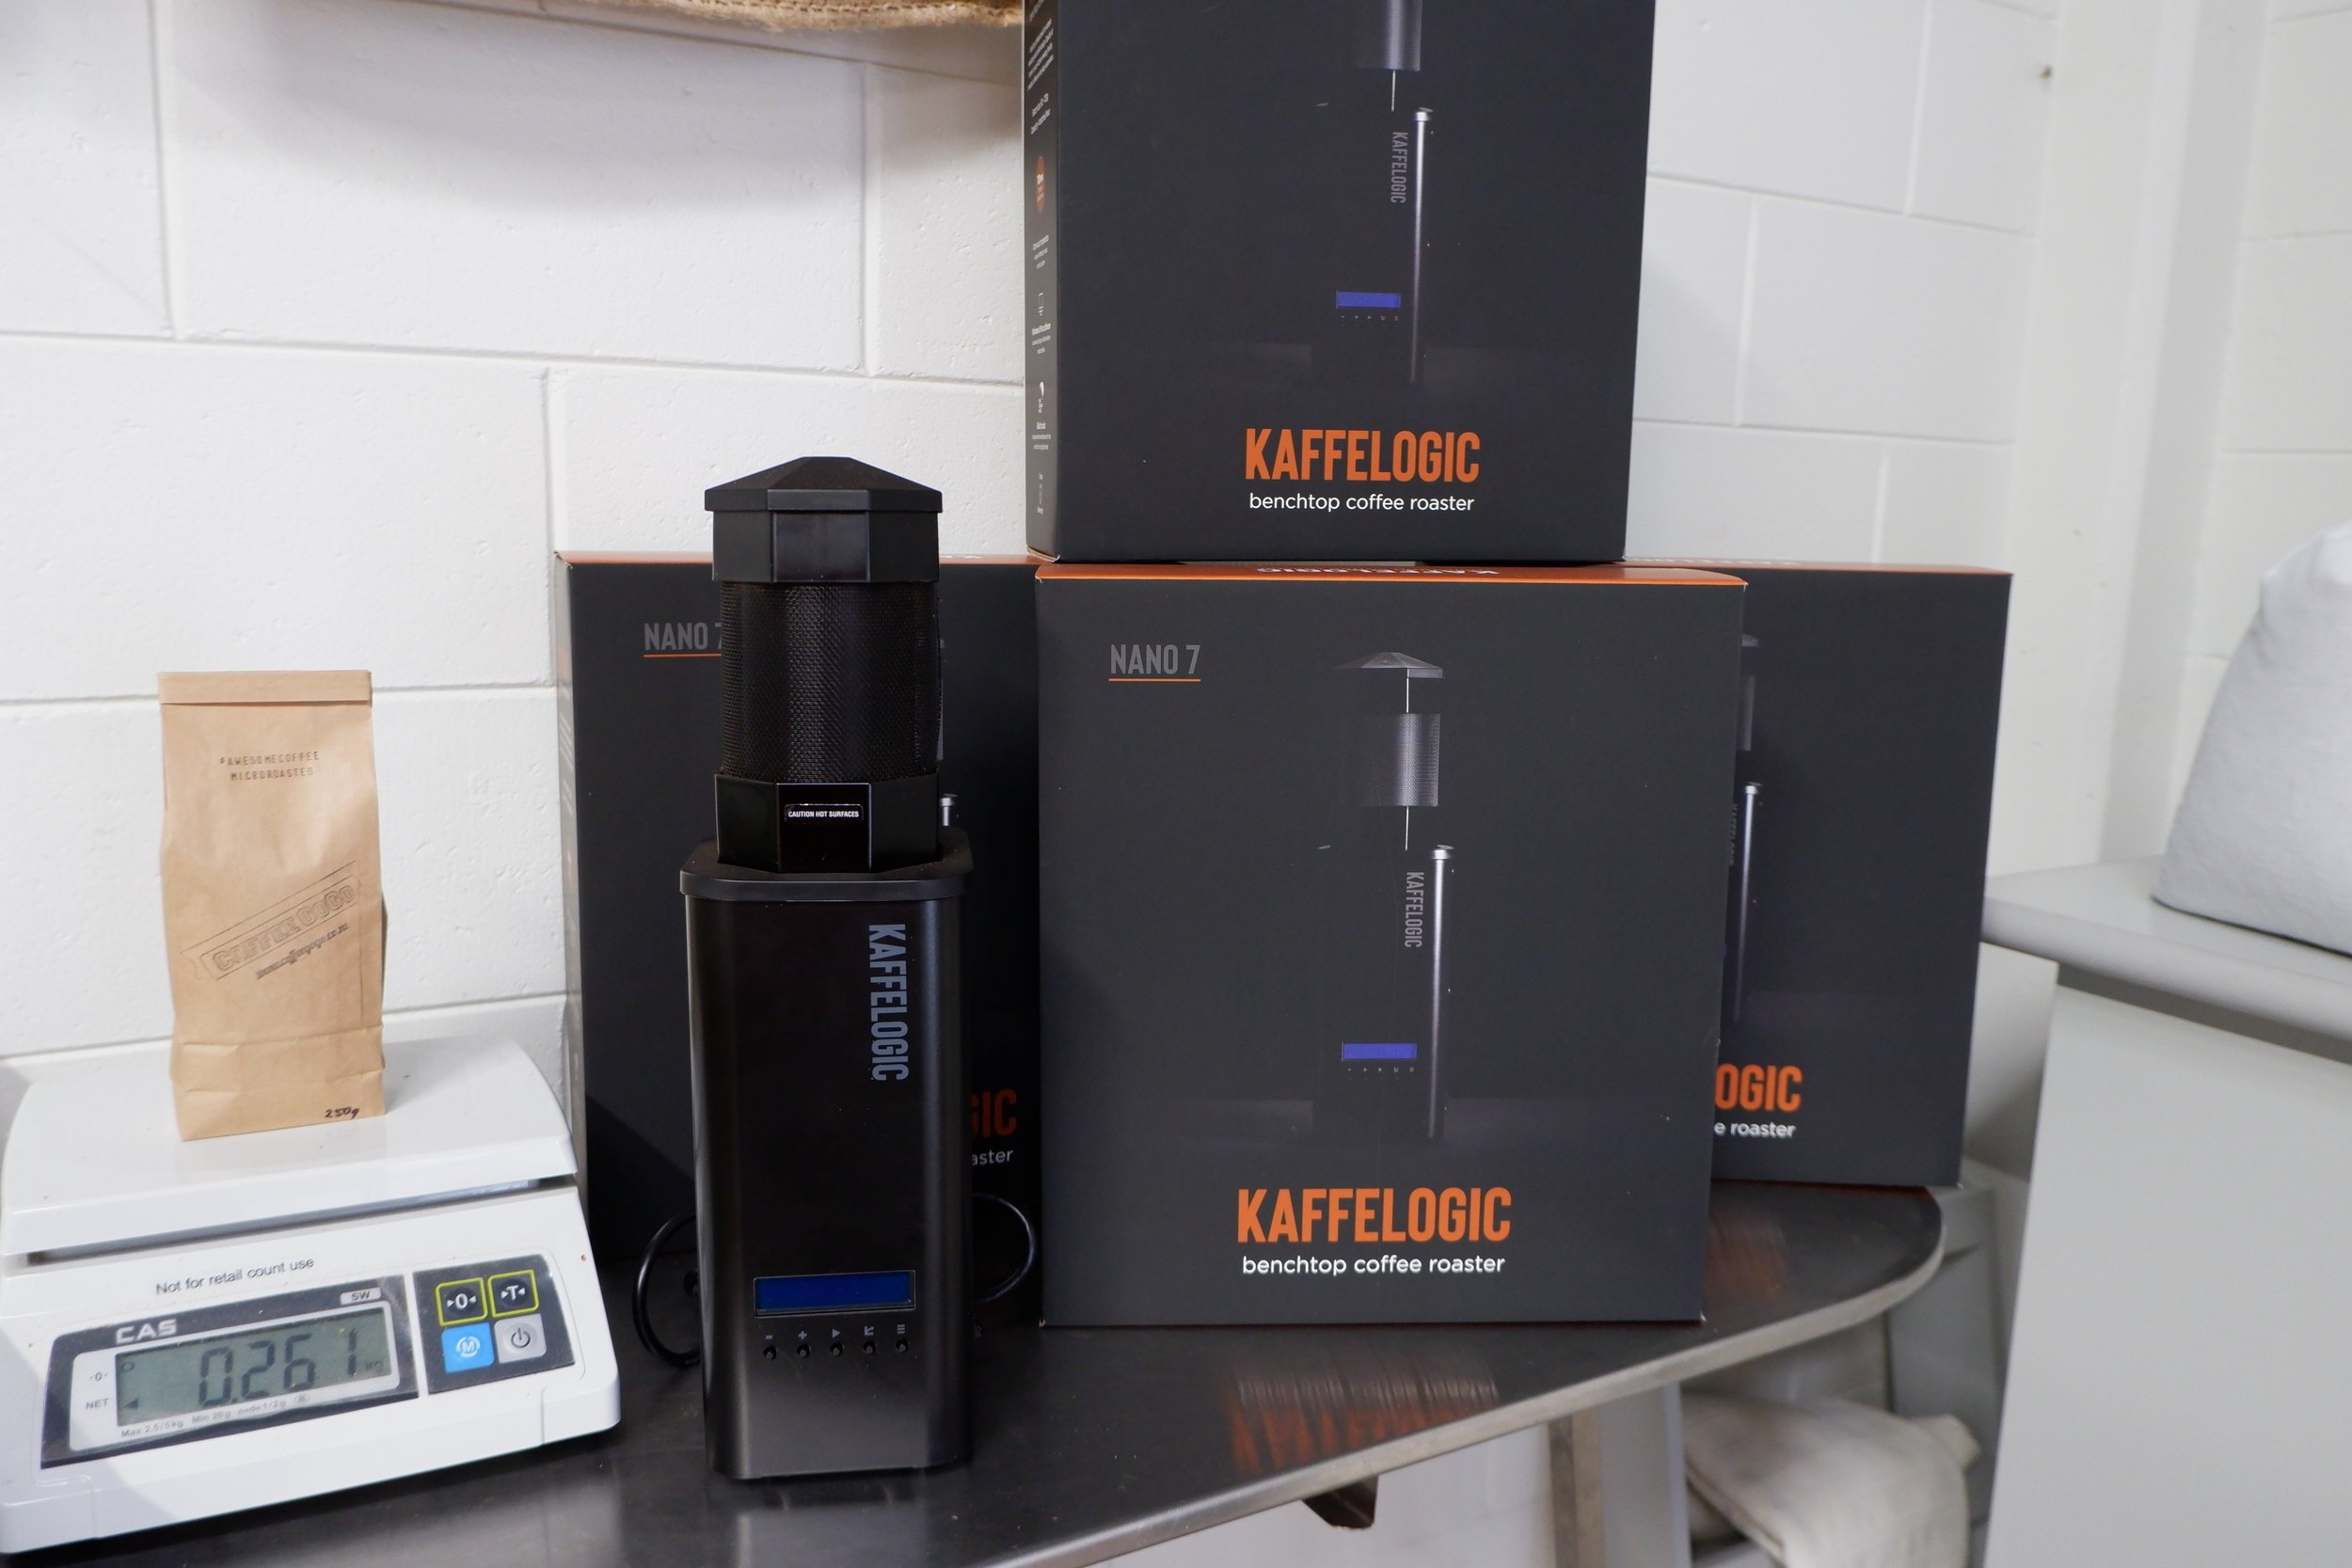  Kaffelogic Demo available in store.  NZ made personal home roaster. 